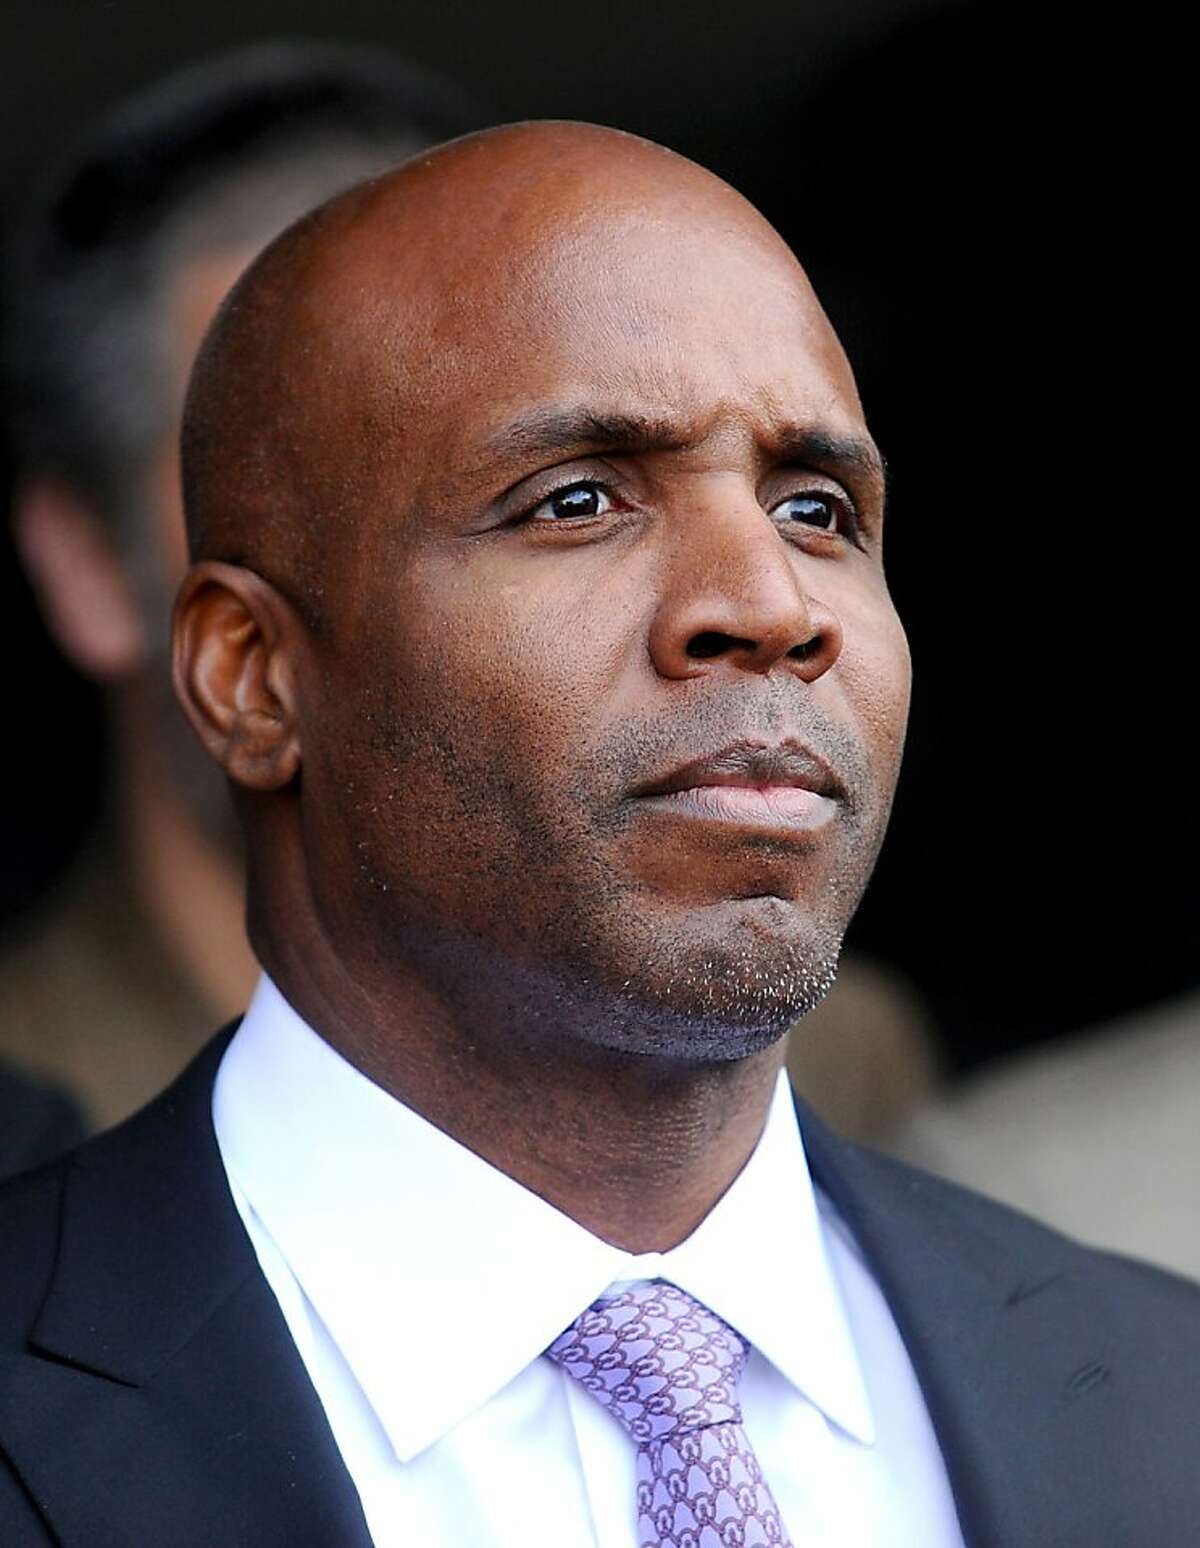 FILE - This April 13, 2011 file photo shows former baseball player Barry Bonds leaving federal court in San Francisco. The sentencing of Bonds will bring the federal government's nearly decade long investigation of a Northern California-based steroids ring to an anti-climactic end, barring an appeal. Bonds is scheduled to be sentenced Friday, Dec. 16, 2011, in San Francisco. Federal sentencing guidelines suggest a prison sentence of between 15 months and 21 months. (AP Photo/Noah Berger, File)